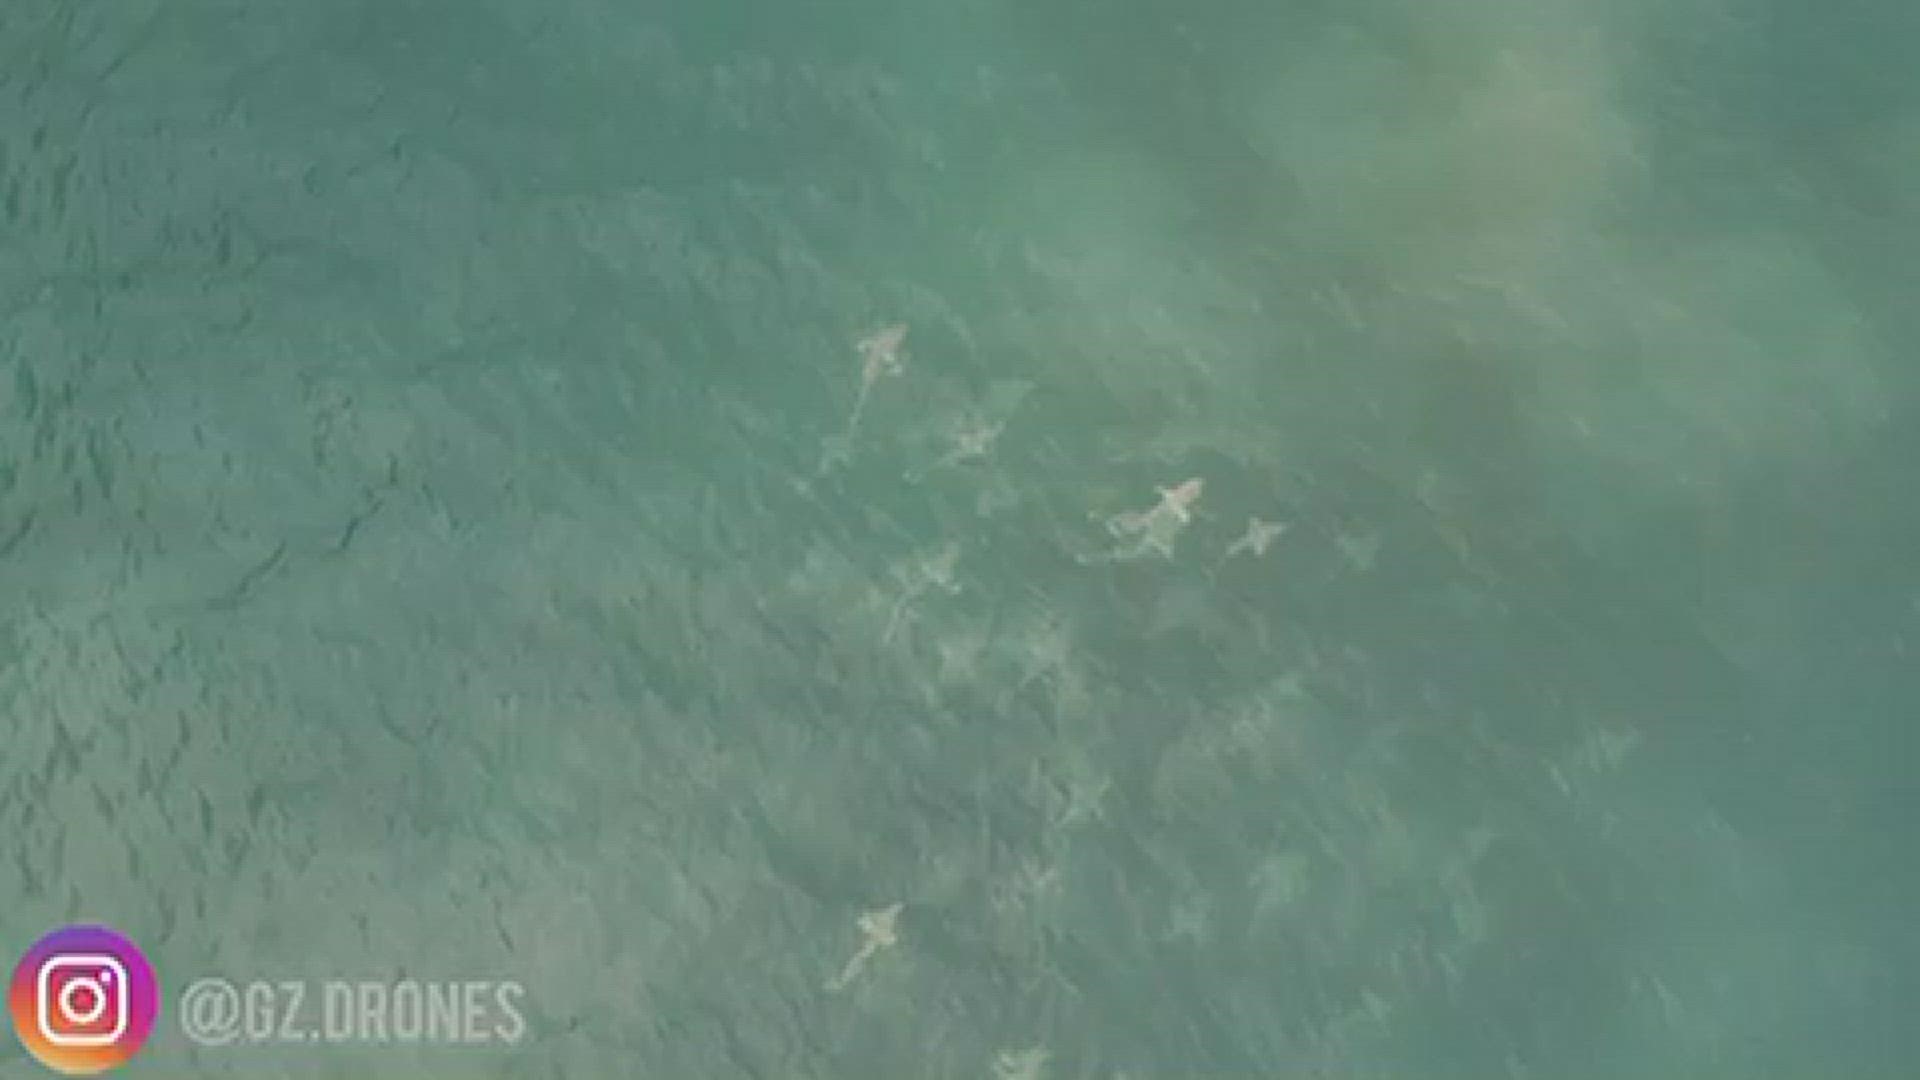 Garrett Zendek said he woke up early to catch the sunrise with his drone, but came up on a frenzy of sharks off Cocoa Beach, Florida.